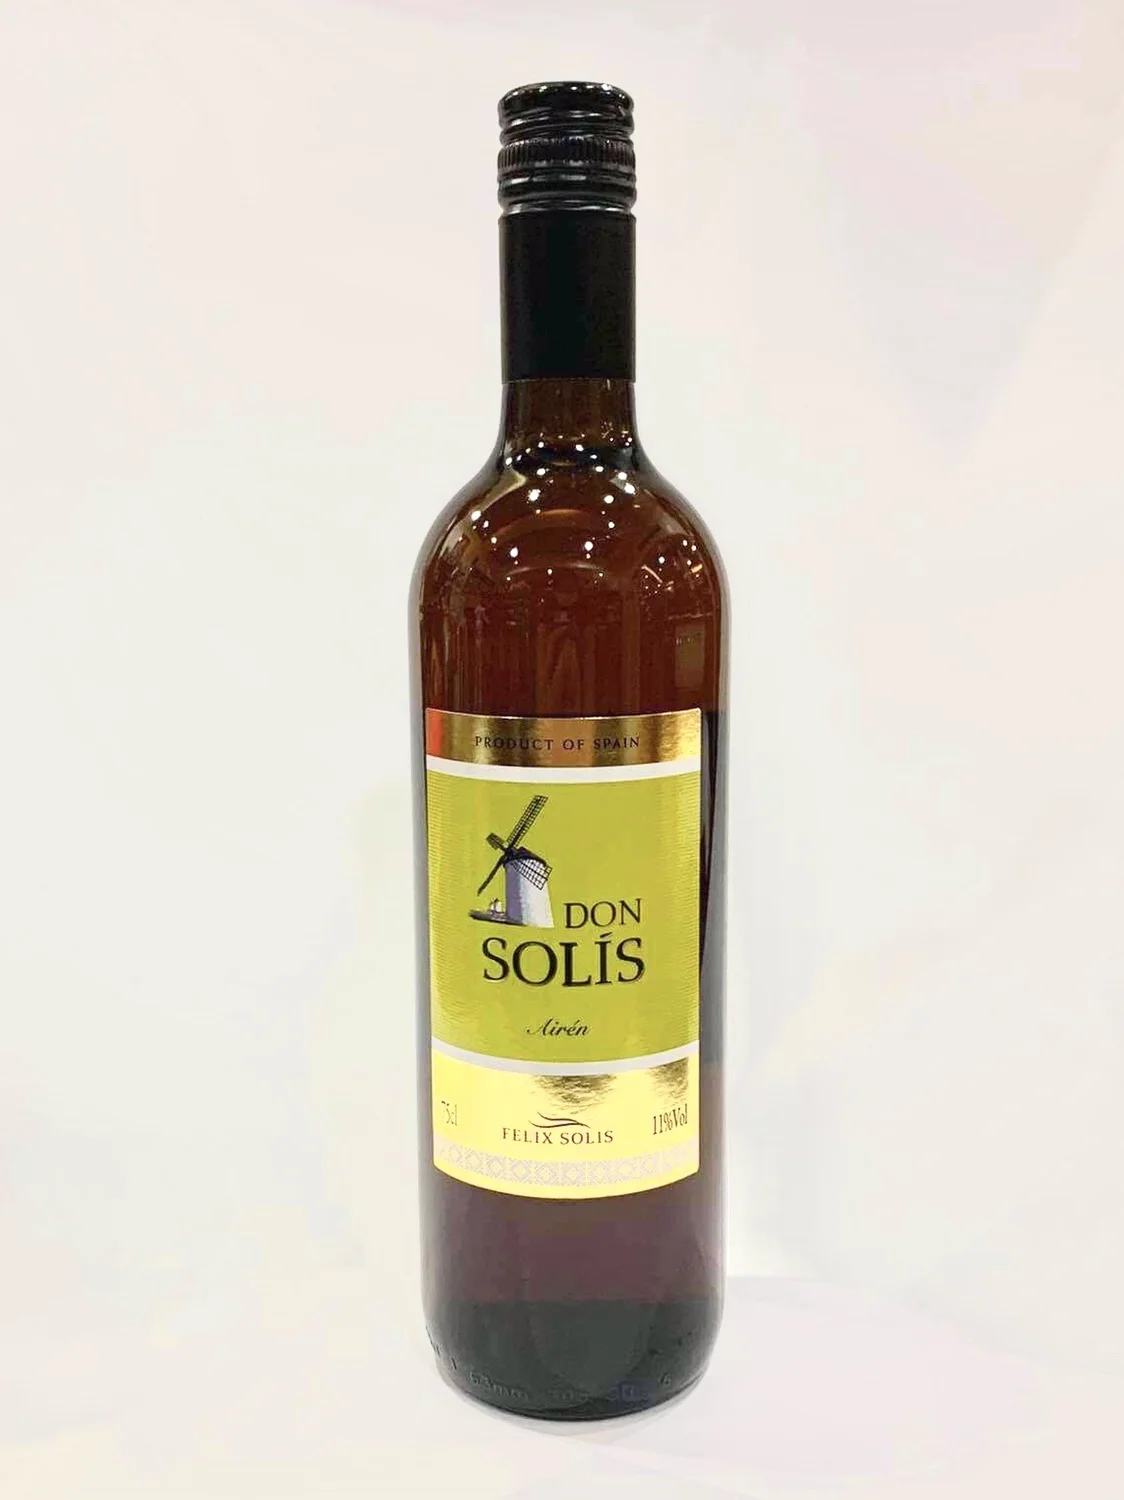 Don Solis Dry White Wine CLEARANCE SALE COOKING WINE